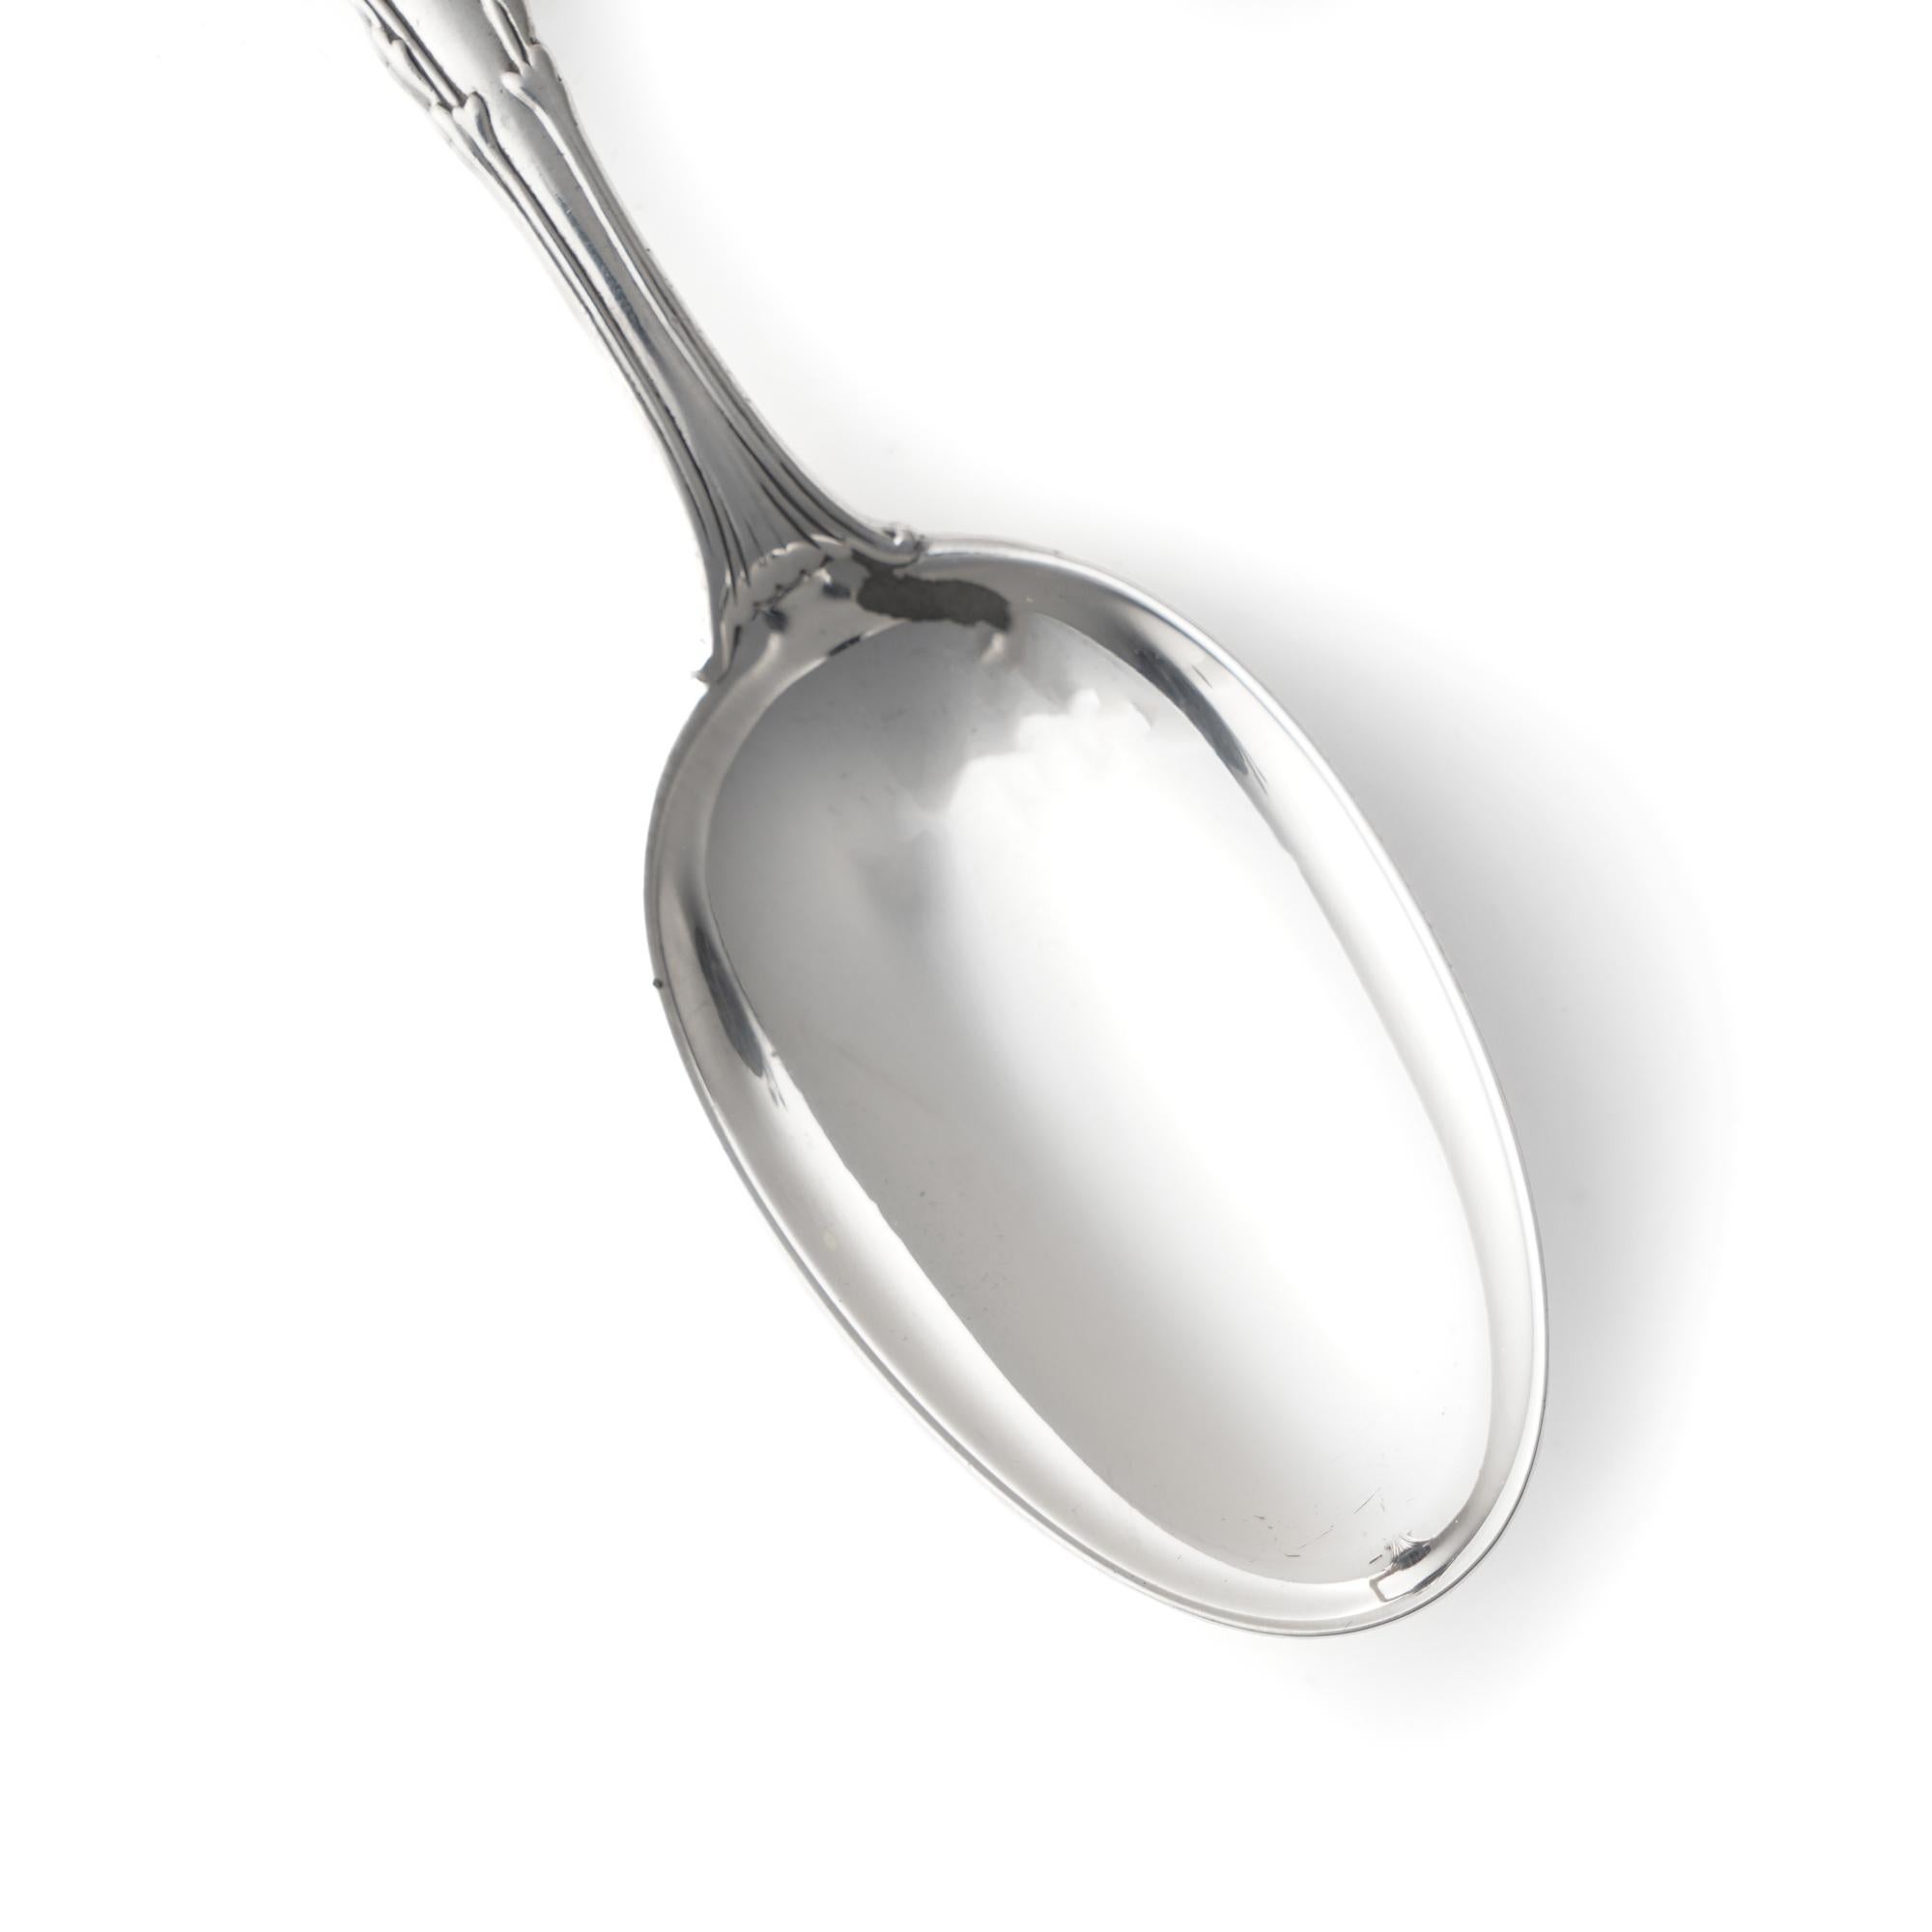 Antique Tiffany & Co. Sterling Silver Florentine Pattern Dessert Spoon For Sale 1